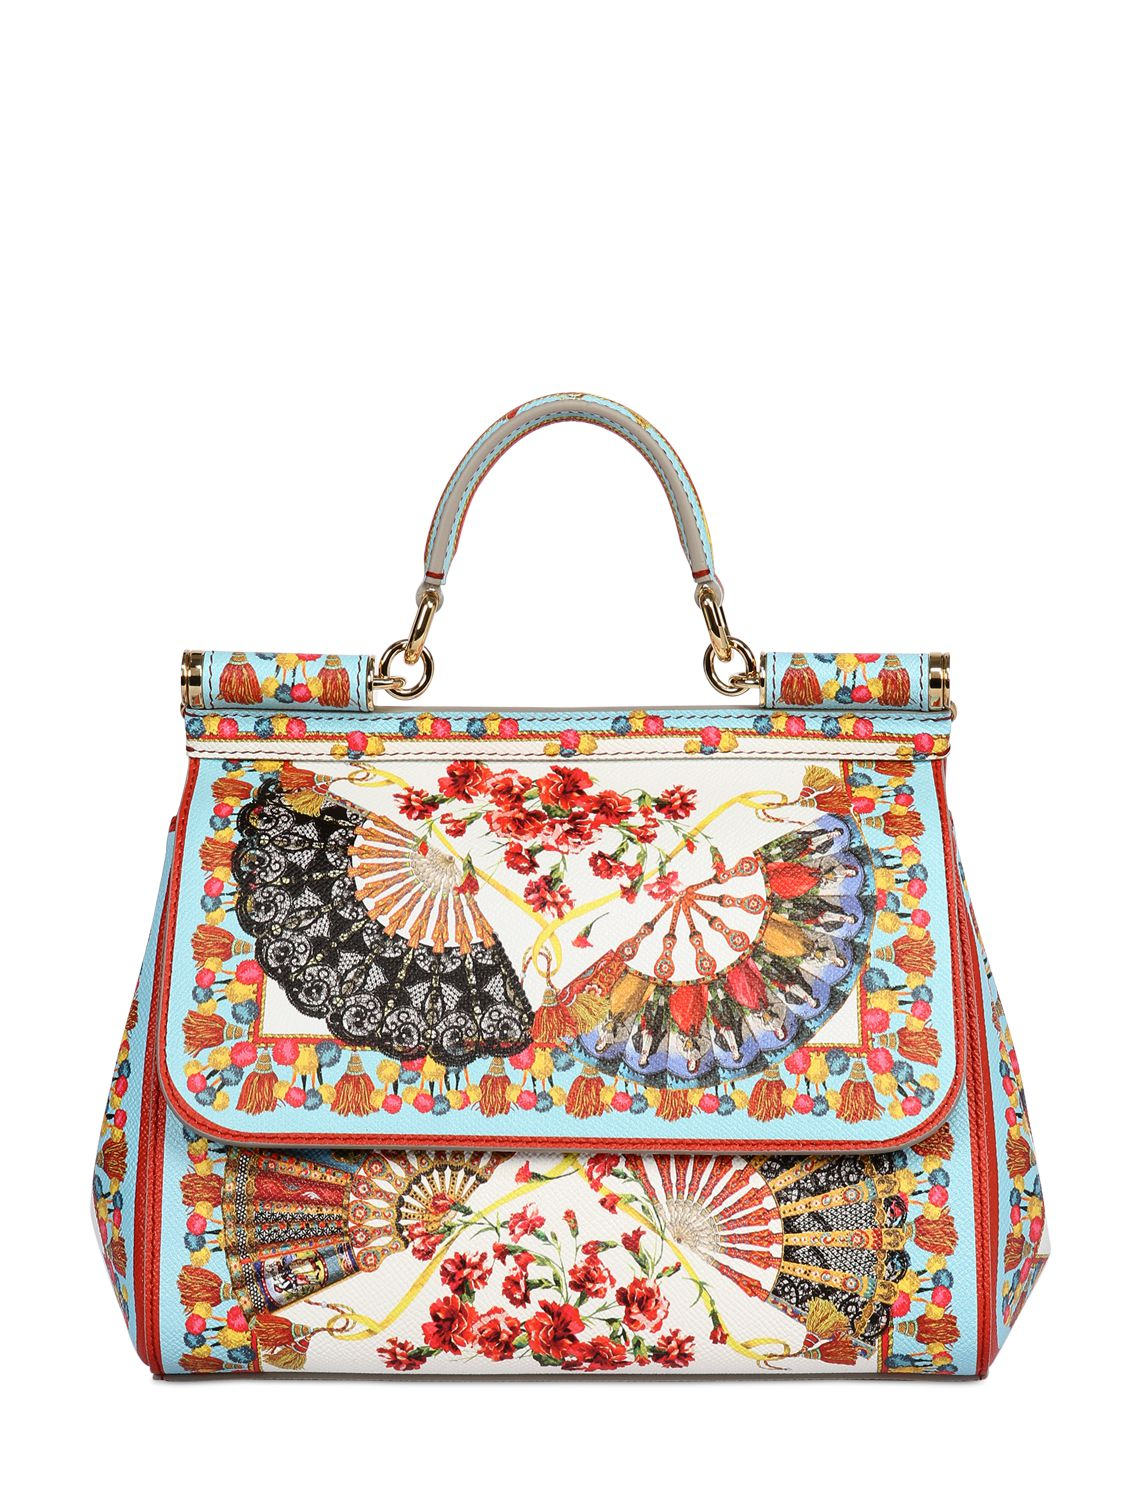 Dolce & Gabbana Sicily Medium Printed Textured-leather Tote in White - Lyst